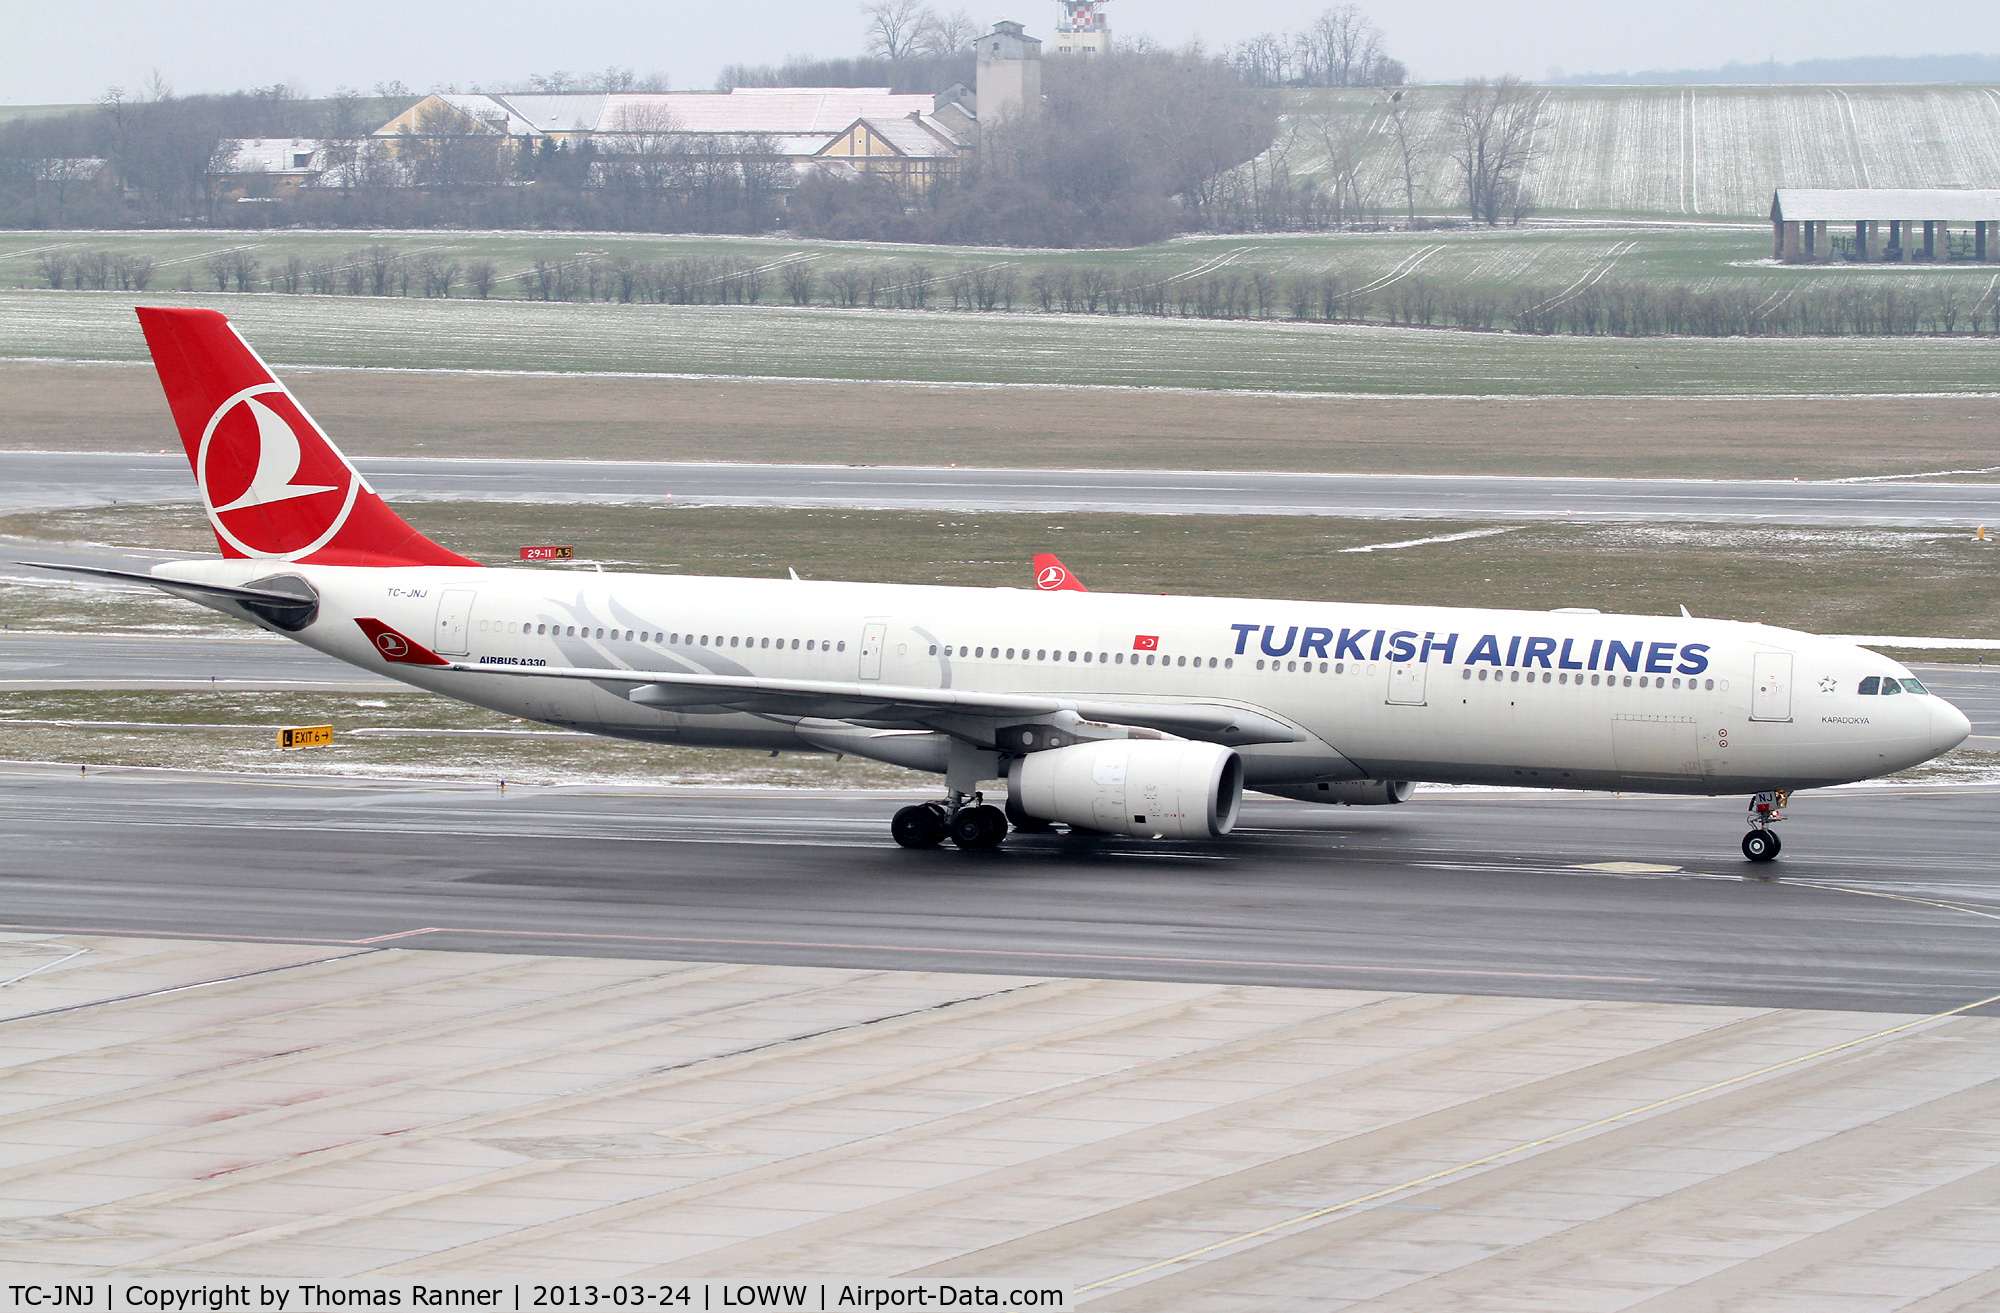 TC-JNJ, 2010 Airbus A330-343X C/N 1170, Turkish Airlines Airbus A330